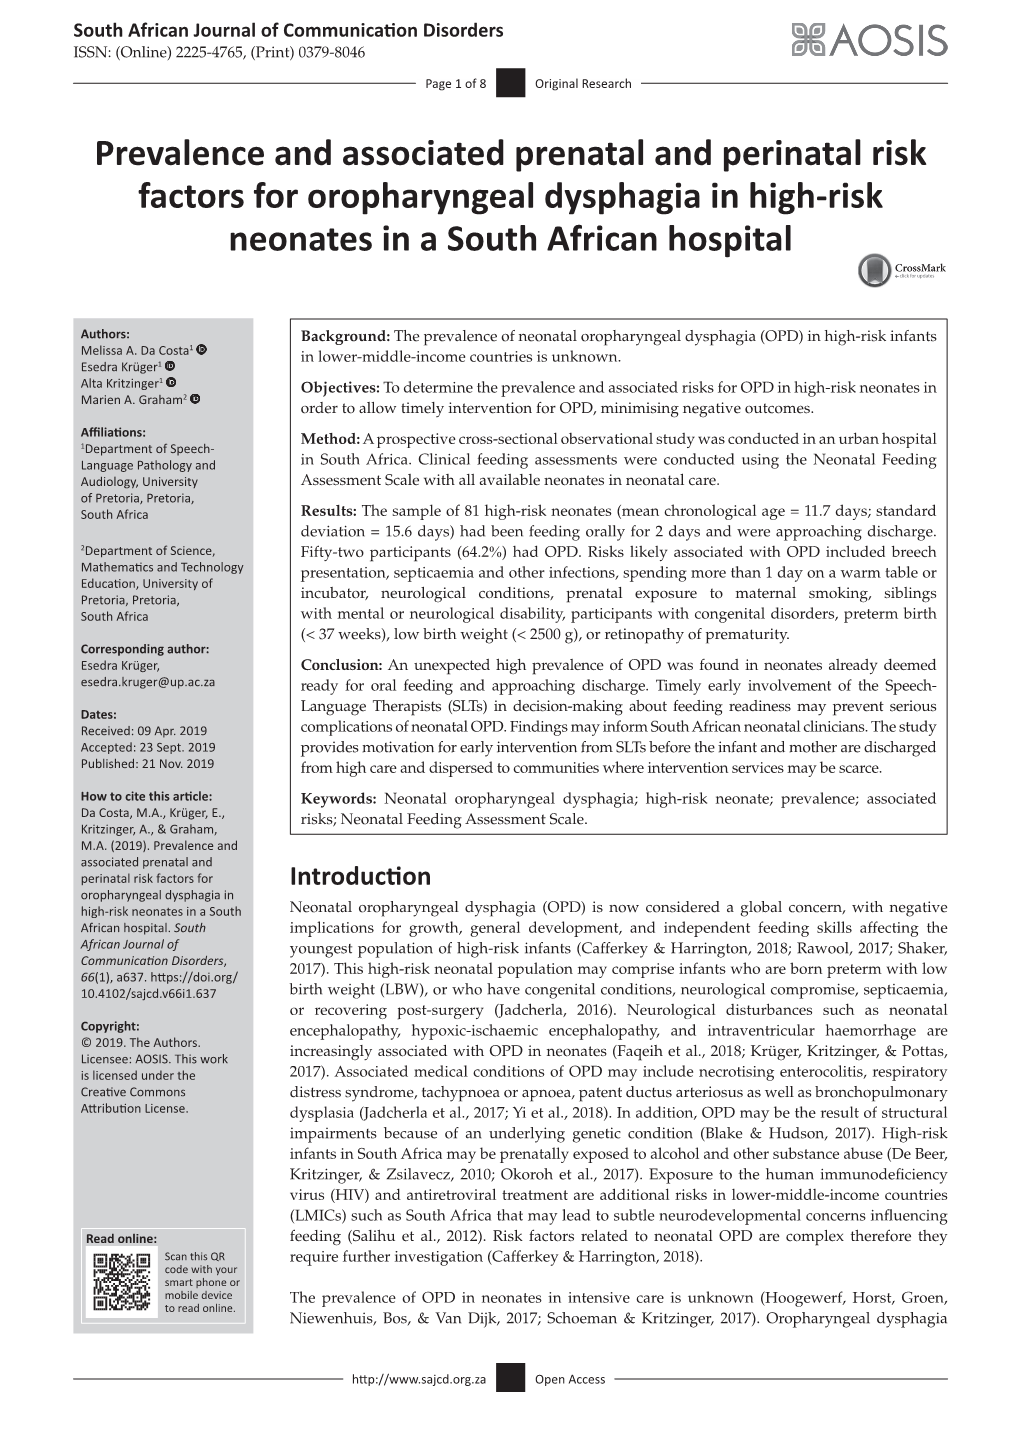 Prevalence and Associated Prenatal and Perinatal Risk Factors for Oropharyngeal Dysphagia in High-Risk Neonates in a South African Hospital